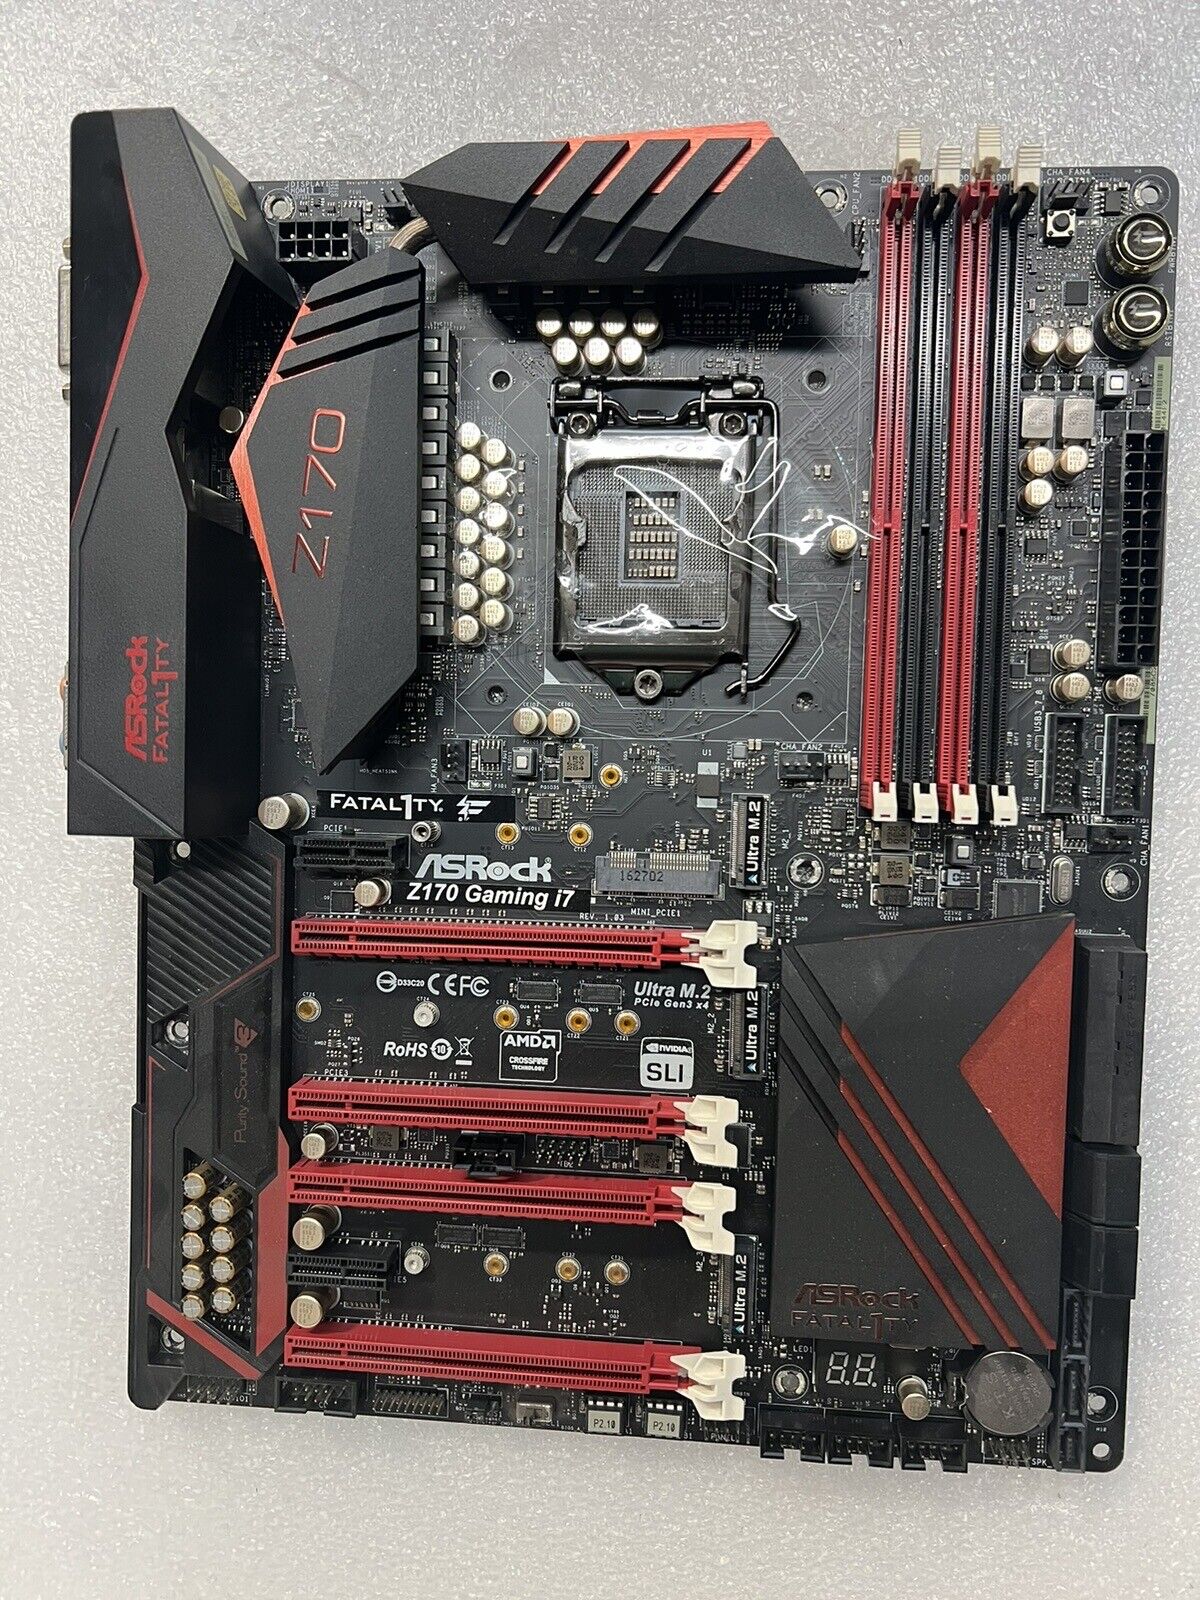 ASRock Fatal1ty Z170 Professional Gaming i7 ATX Motherboard Include I/O Shield